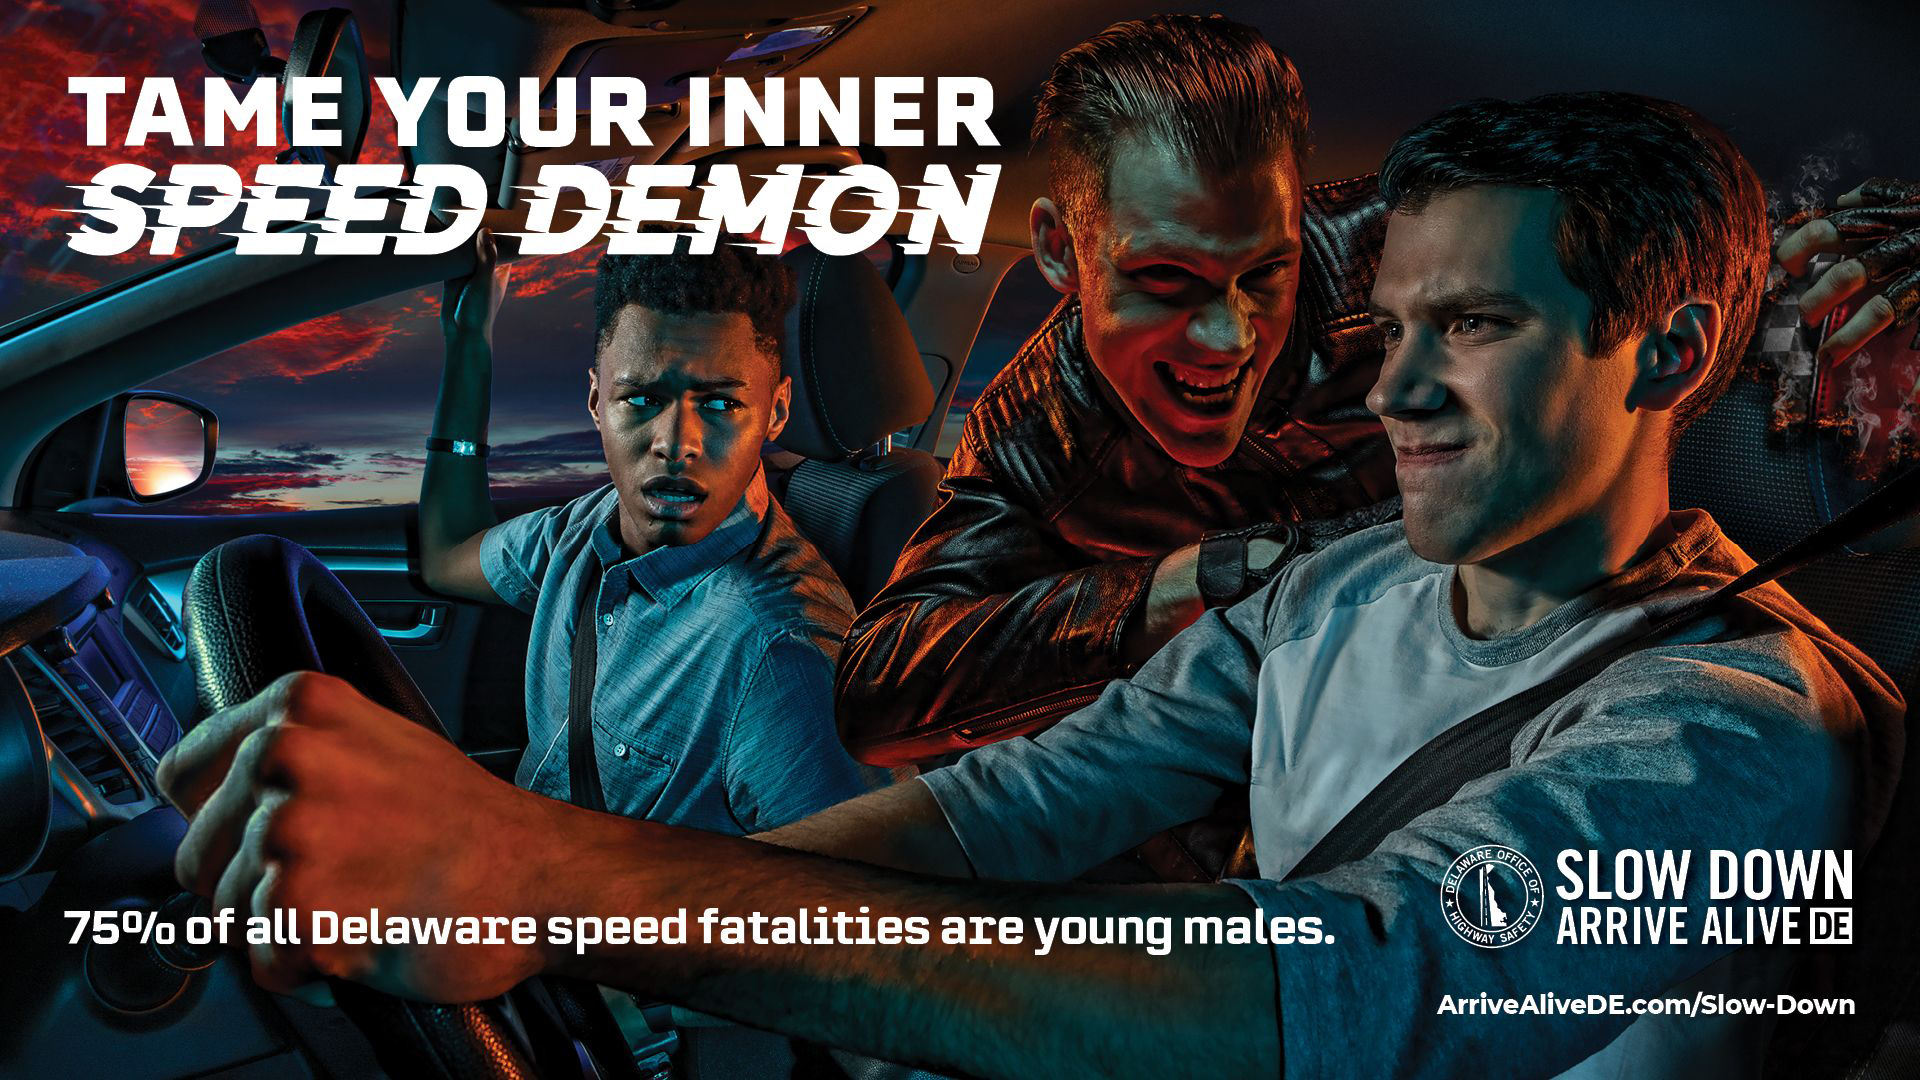 teenagers in a car, speeding with one teenager looking possessed.